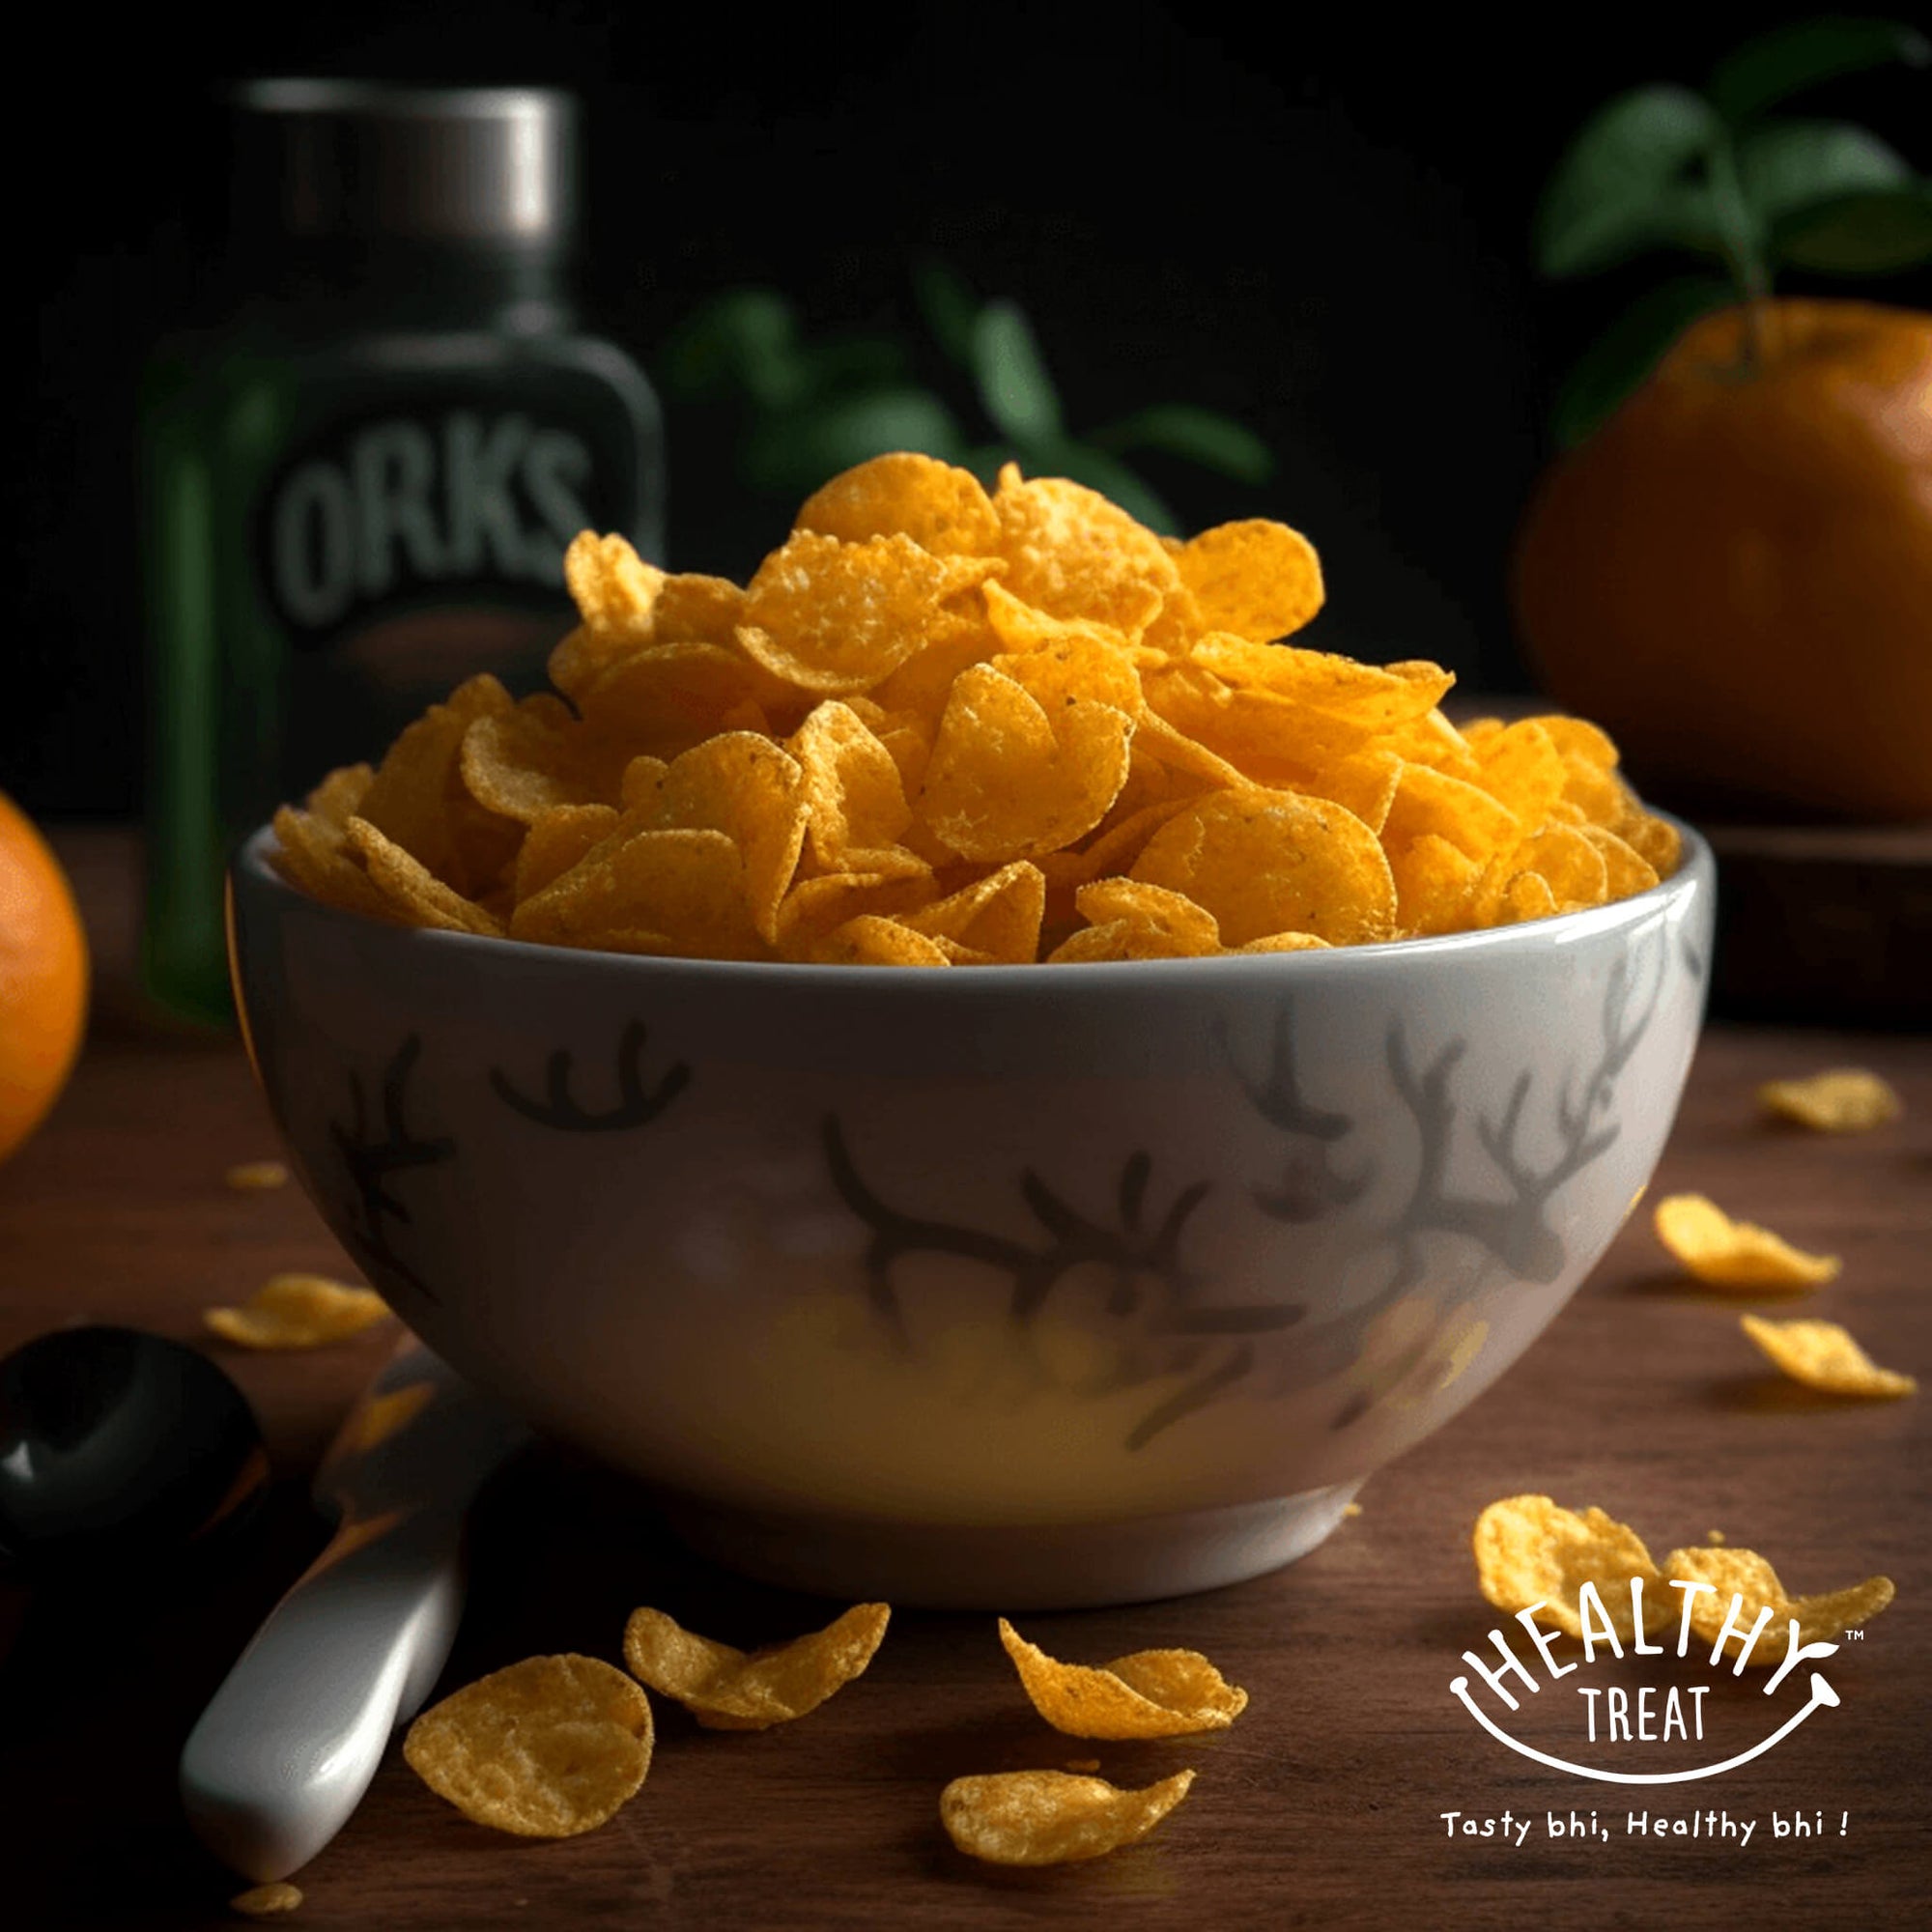 Healthy Treat Roasted Cornflakes namkeen, is oil free and crunchy, healthy and protein packed, made with real corn.